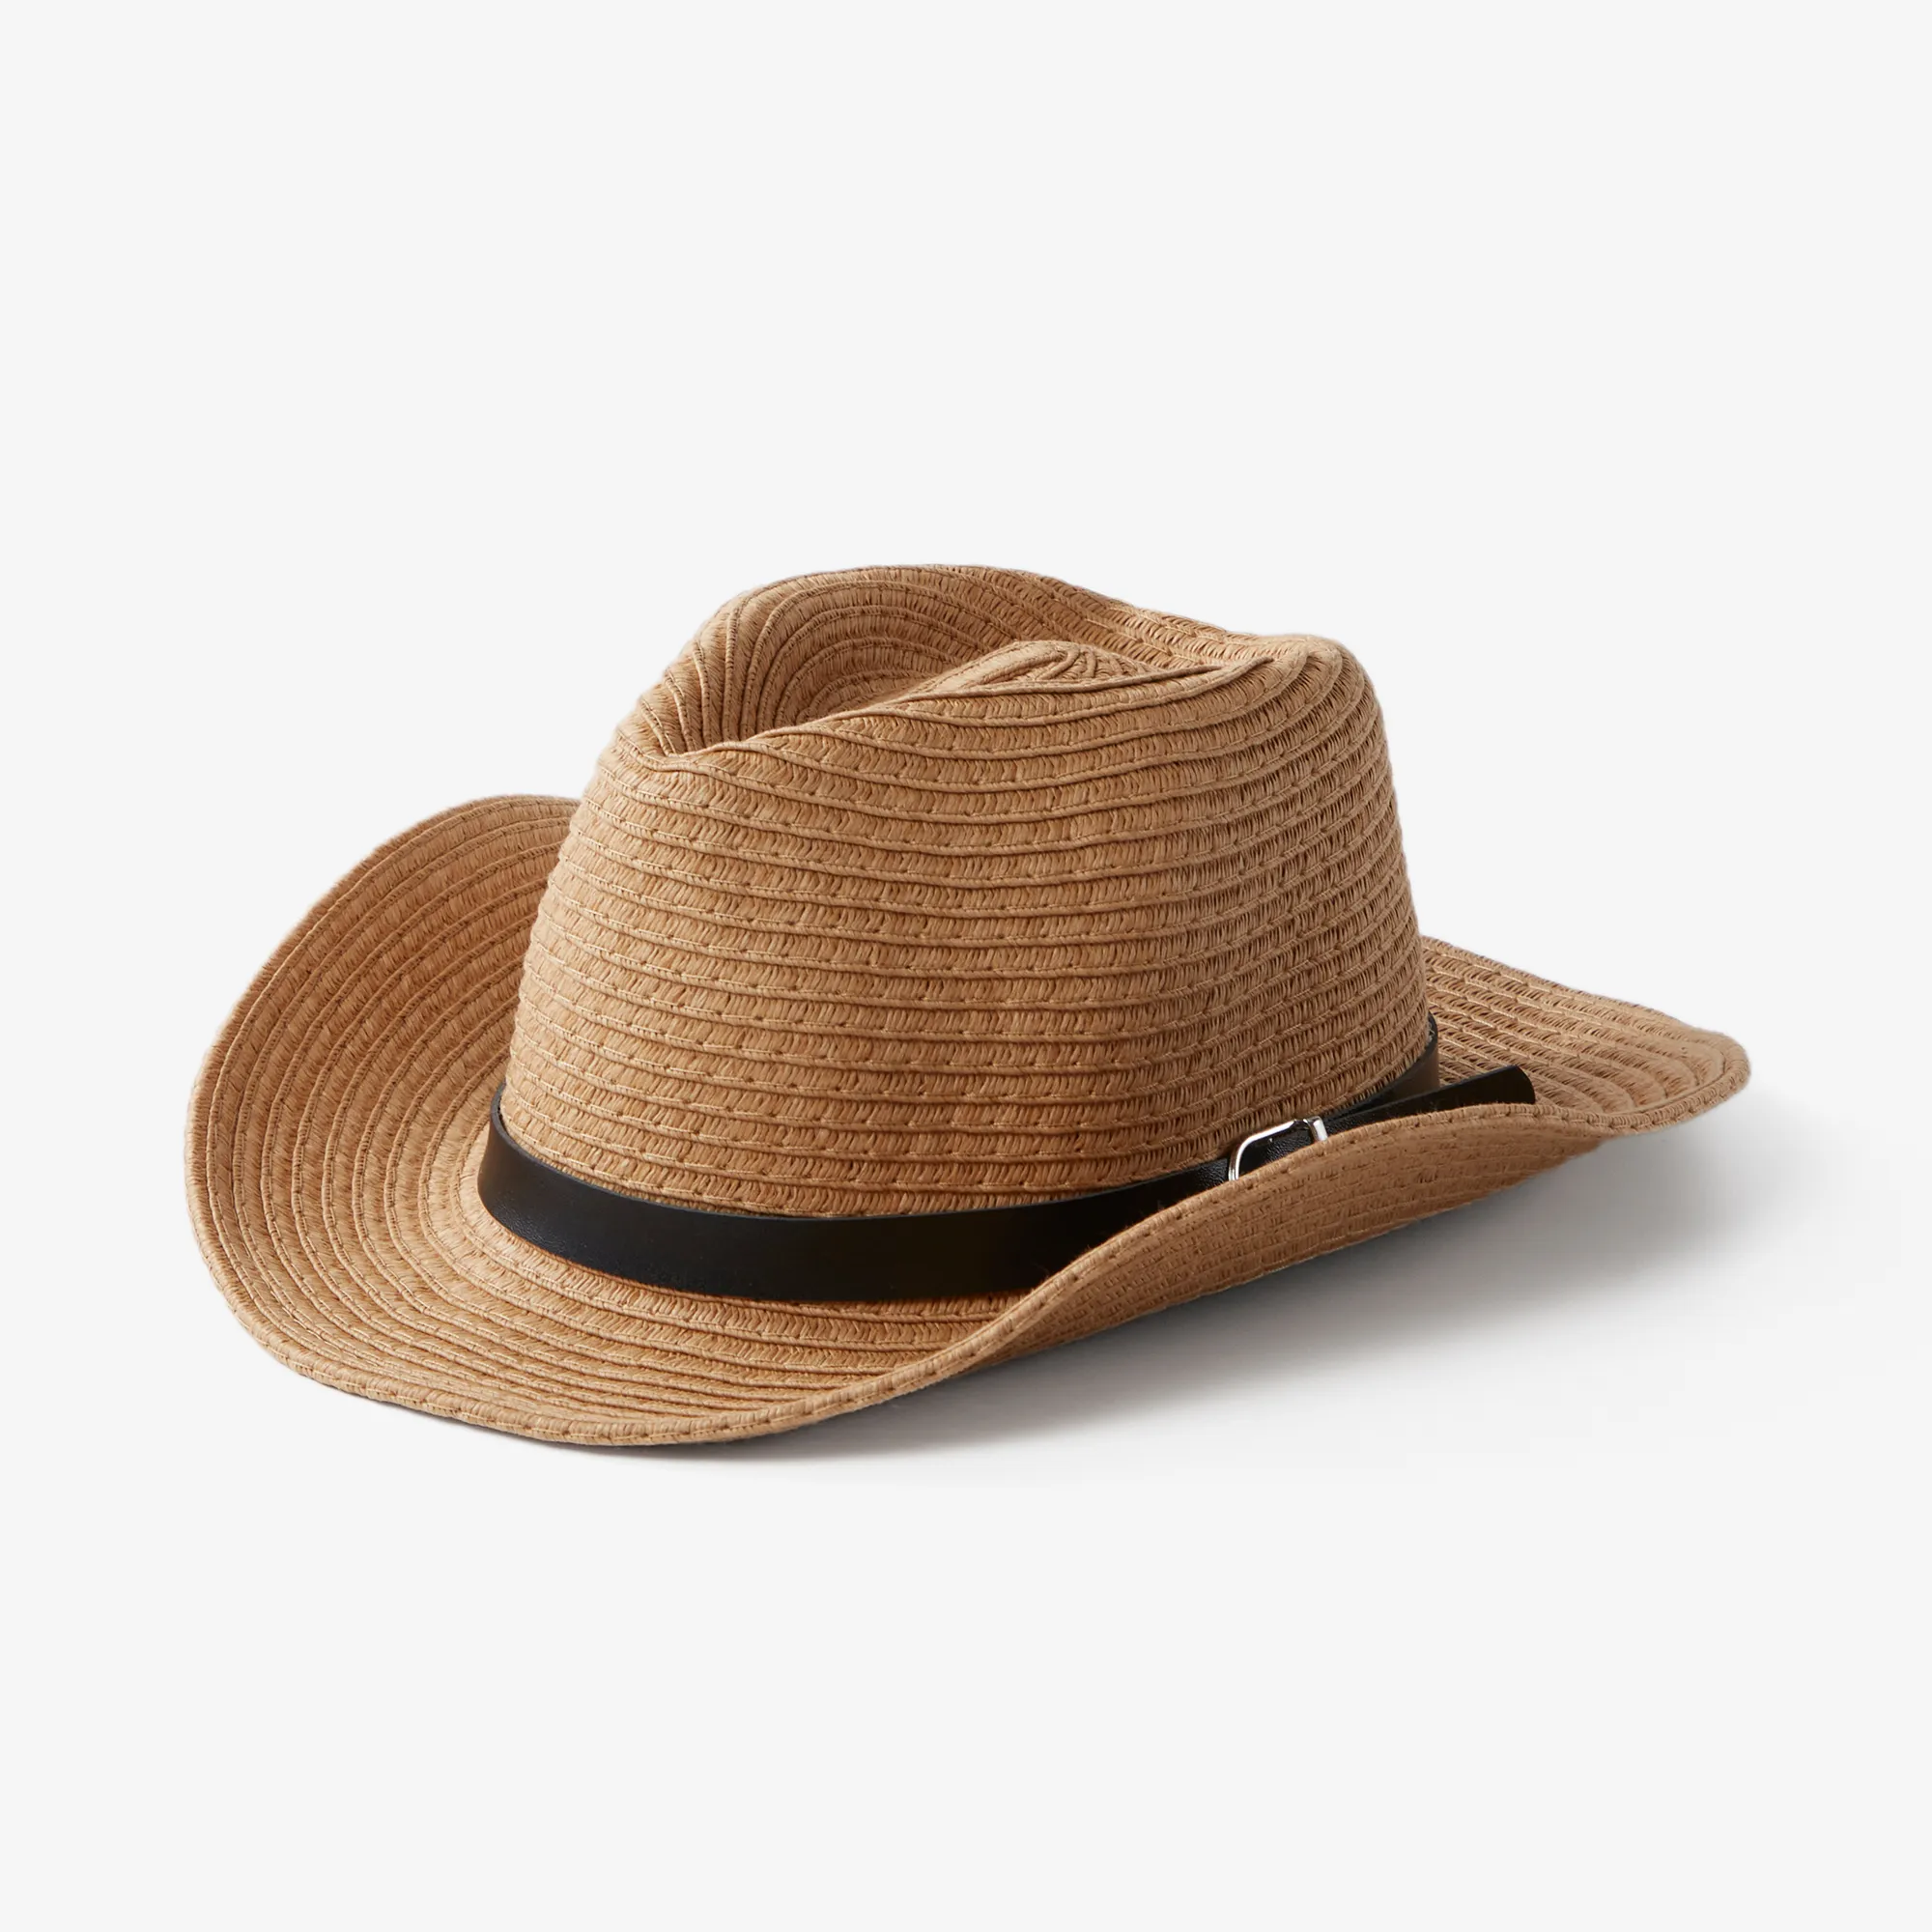 Daddy And Me Solid Color Western Cowboy Straw Hat, 100% Bamboo Pulp Fiber Material